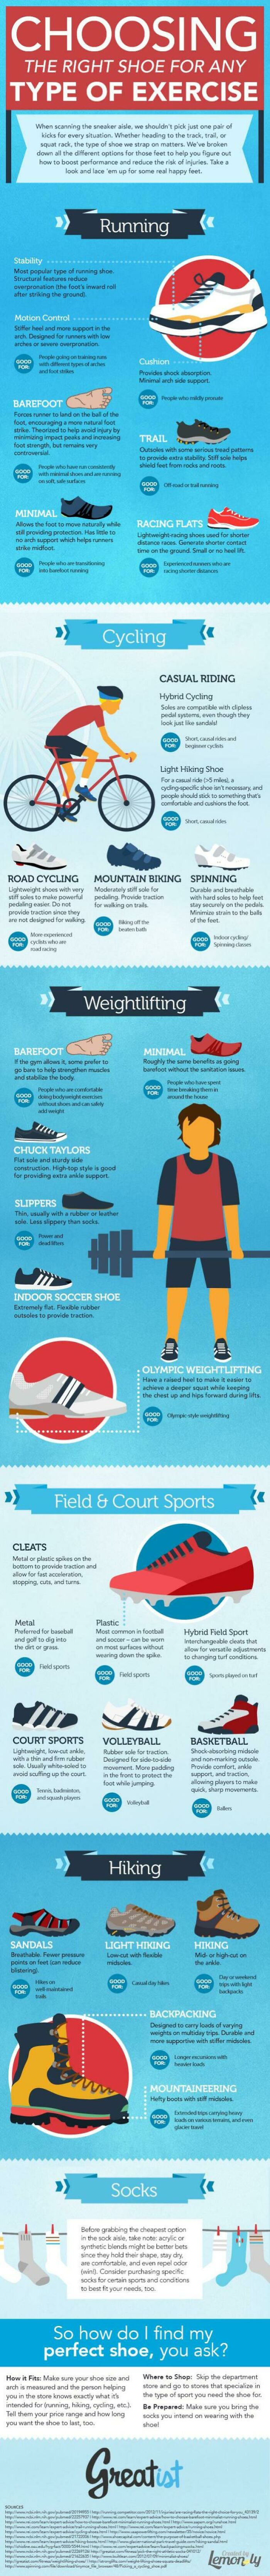 Choosing Shoes For Your Exercise